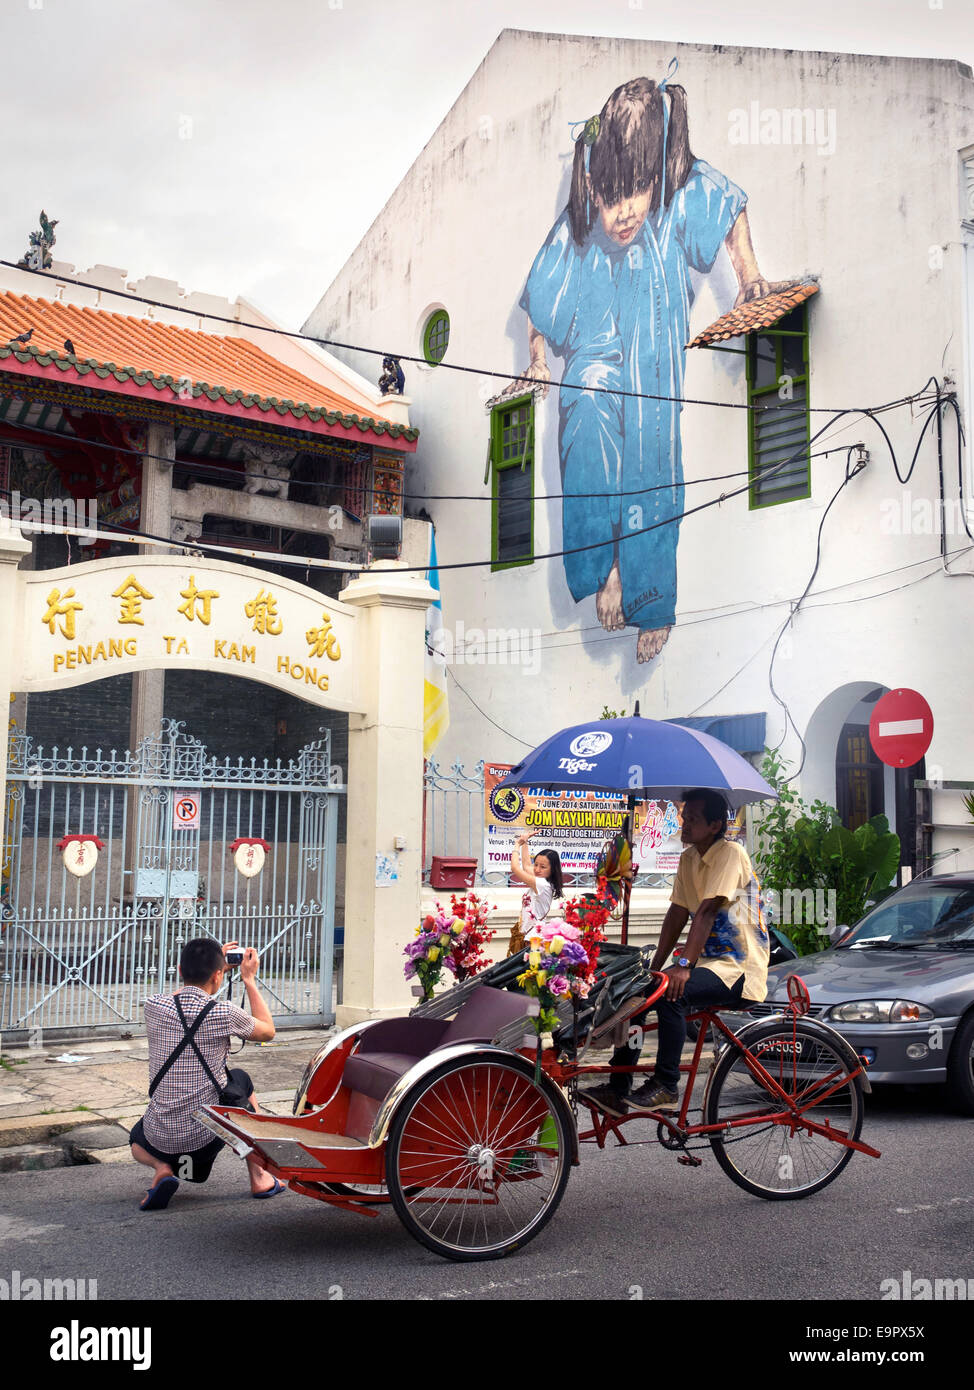 Tourists taking a picture in front of the Little Girl in Blue street art mural in George Town, Penang, Malaysia. Stock Photo